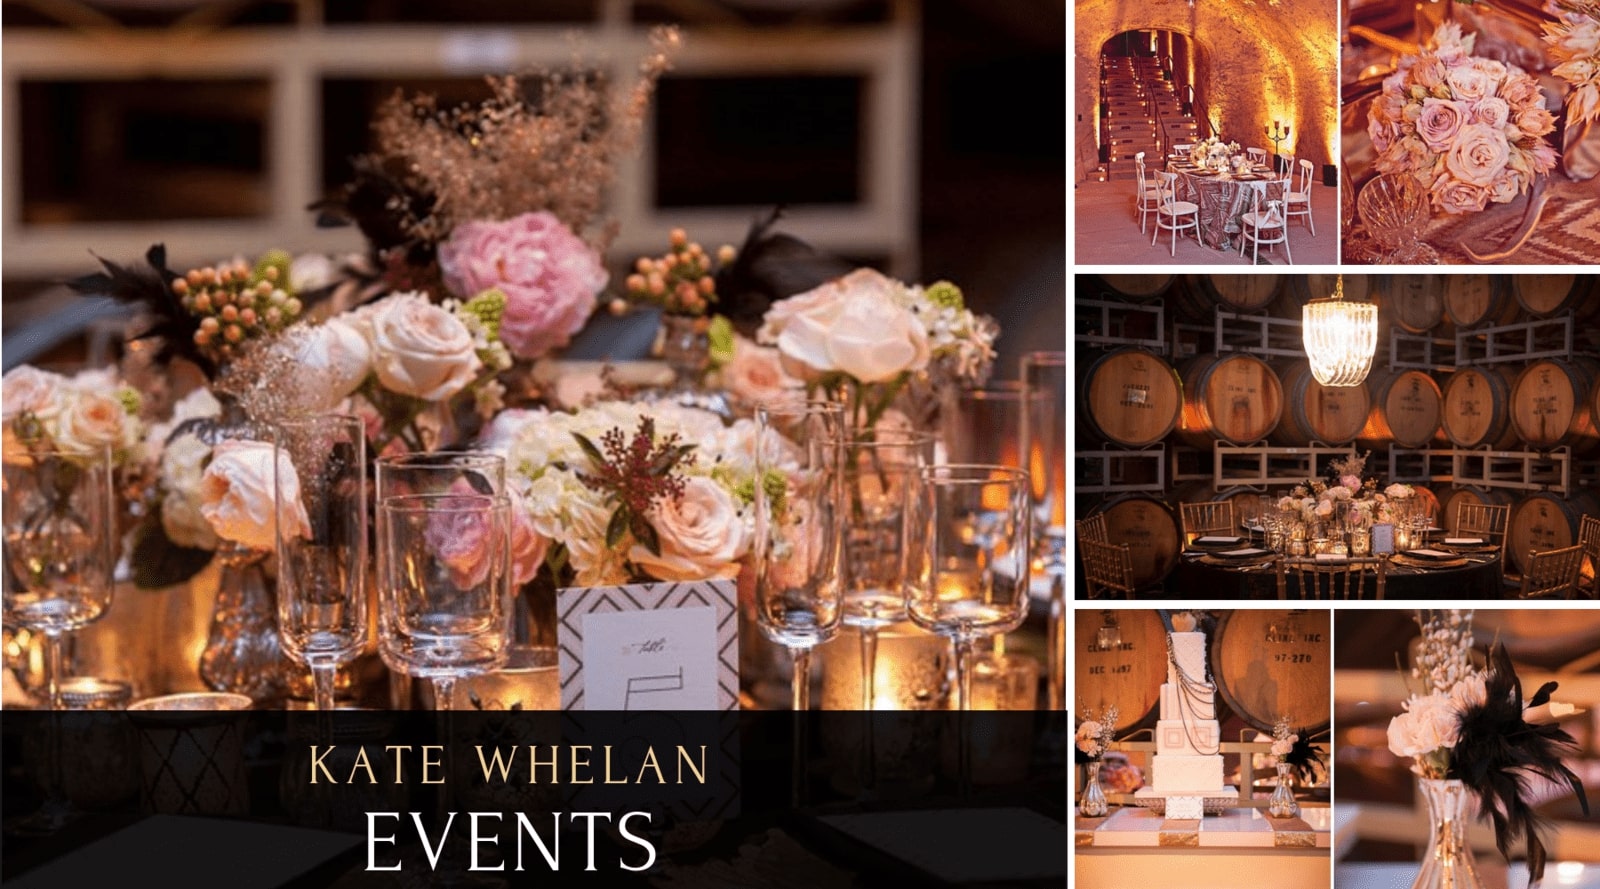 Today's Expert: Kate Whelan from Kate Whelan Events